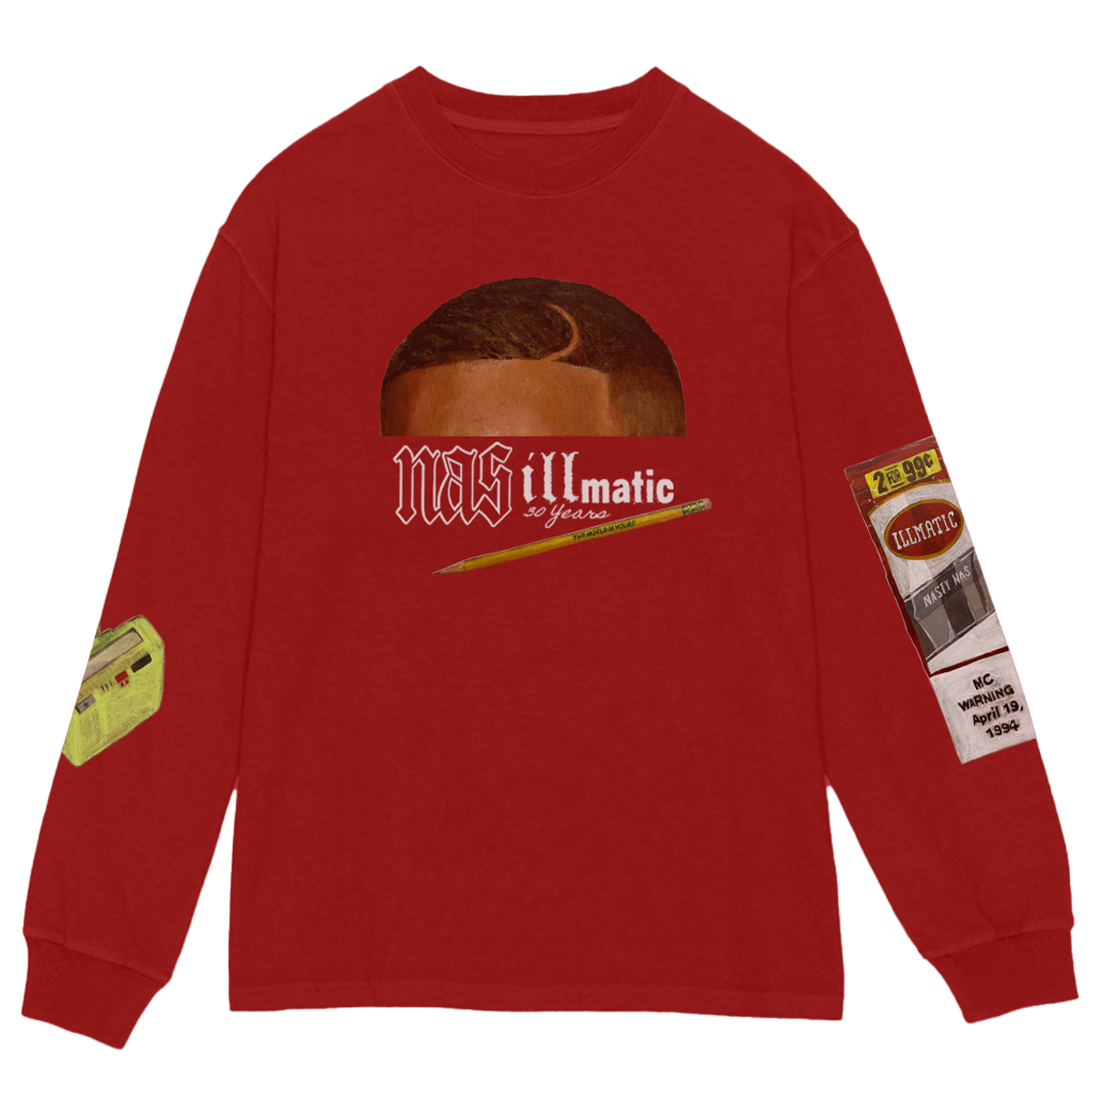 Red long-sleeve shirt with &quot;Illmatic&quot; album graphics, and an explicit content sticker